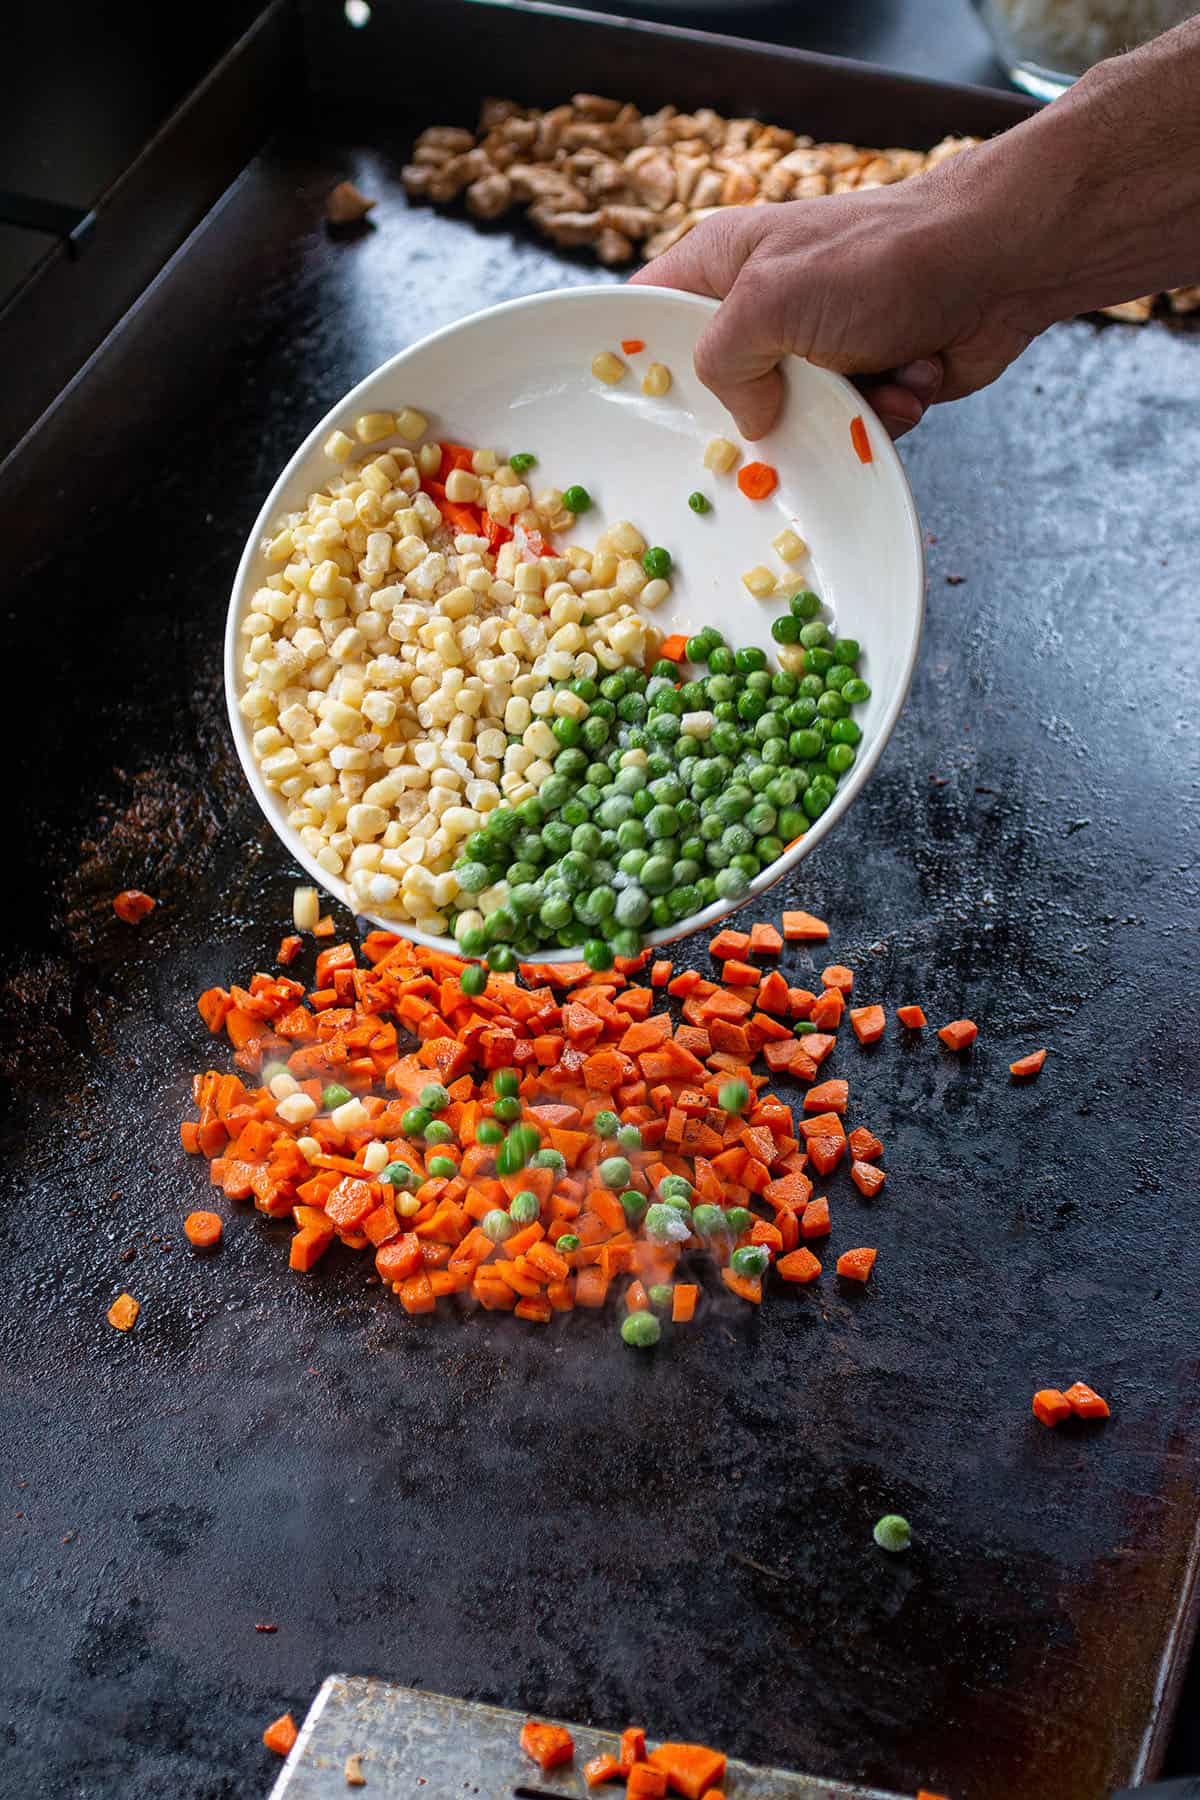 Frozen corn and peas being added to the cooked carrots.